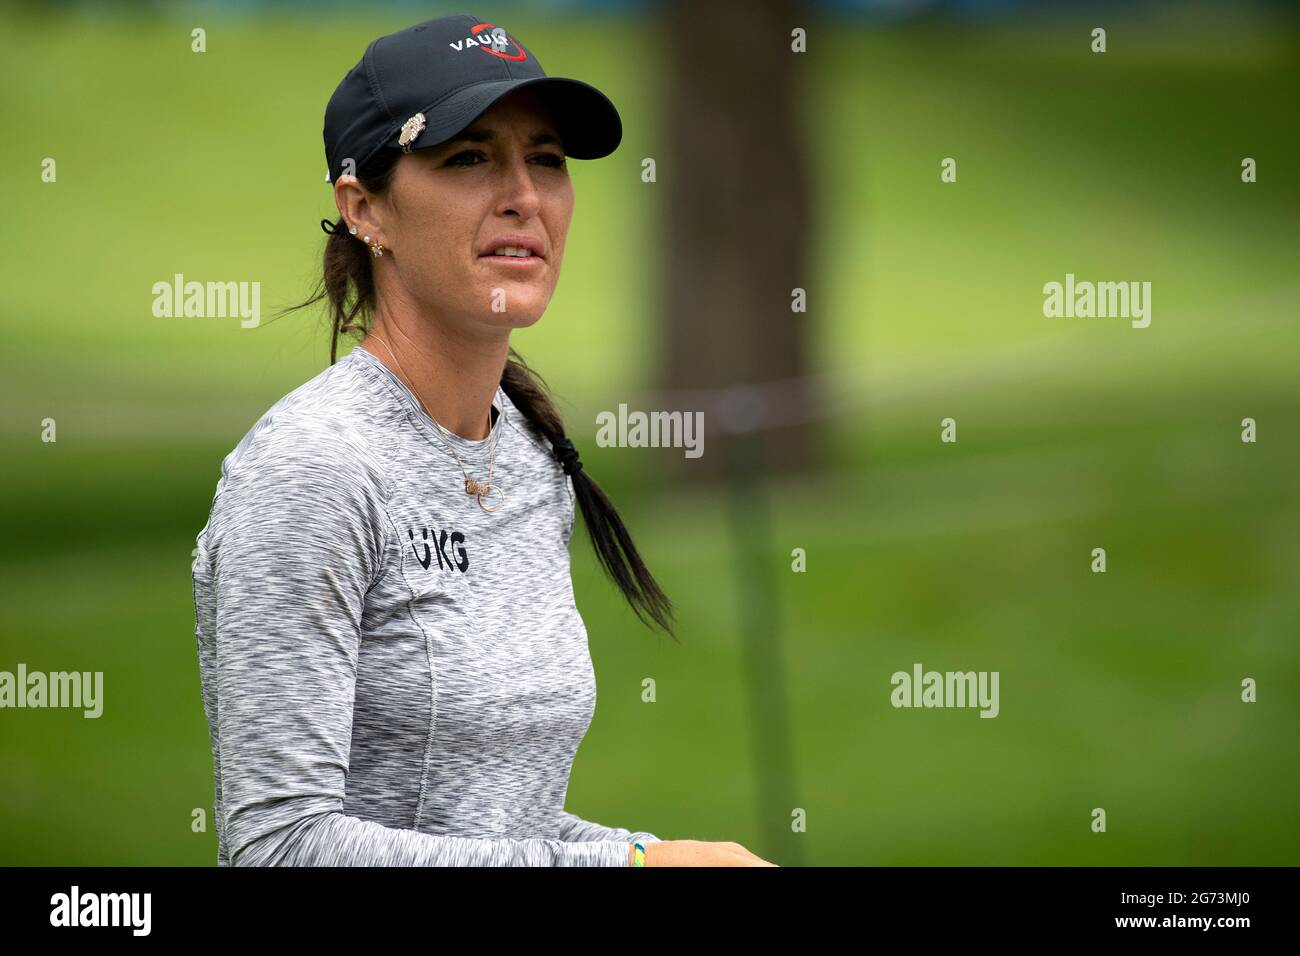 Sylvania, Ohio, USA. 10th July, 2021. Jaye Marie Green looks on during the third round of the Marathon Classic in Sylvania, Ohio. She shot a 75 and finished her third round tied for 77th. Credit: Mark Bialek/ZUMA Wire/Alamy Live News Stock Photo